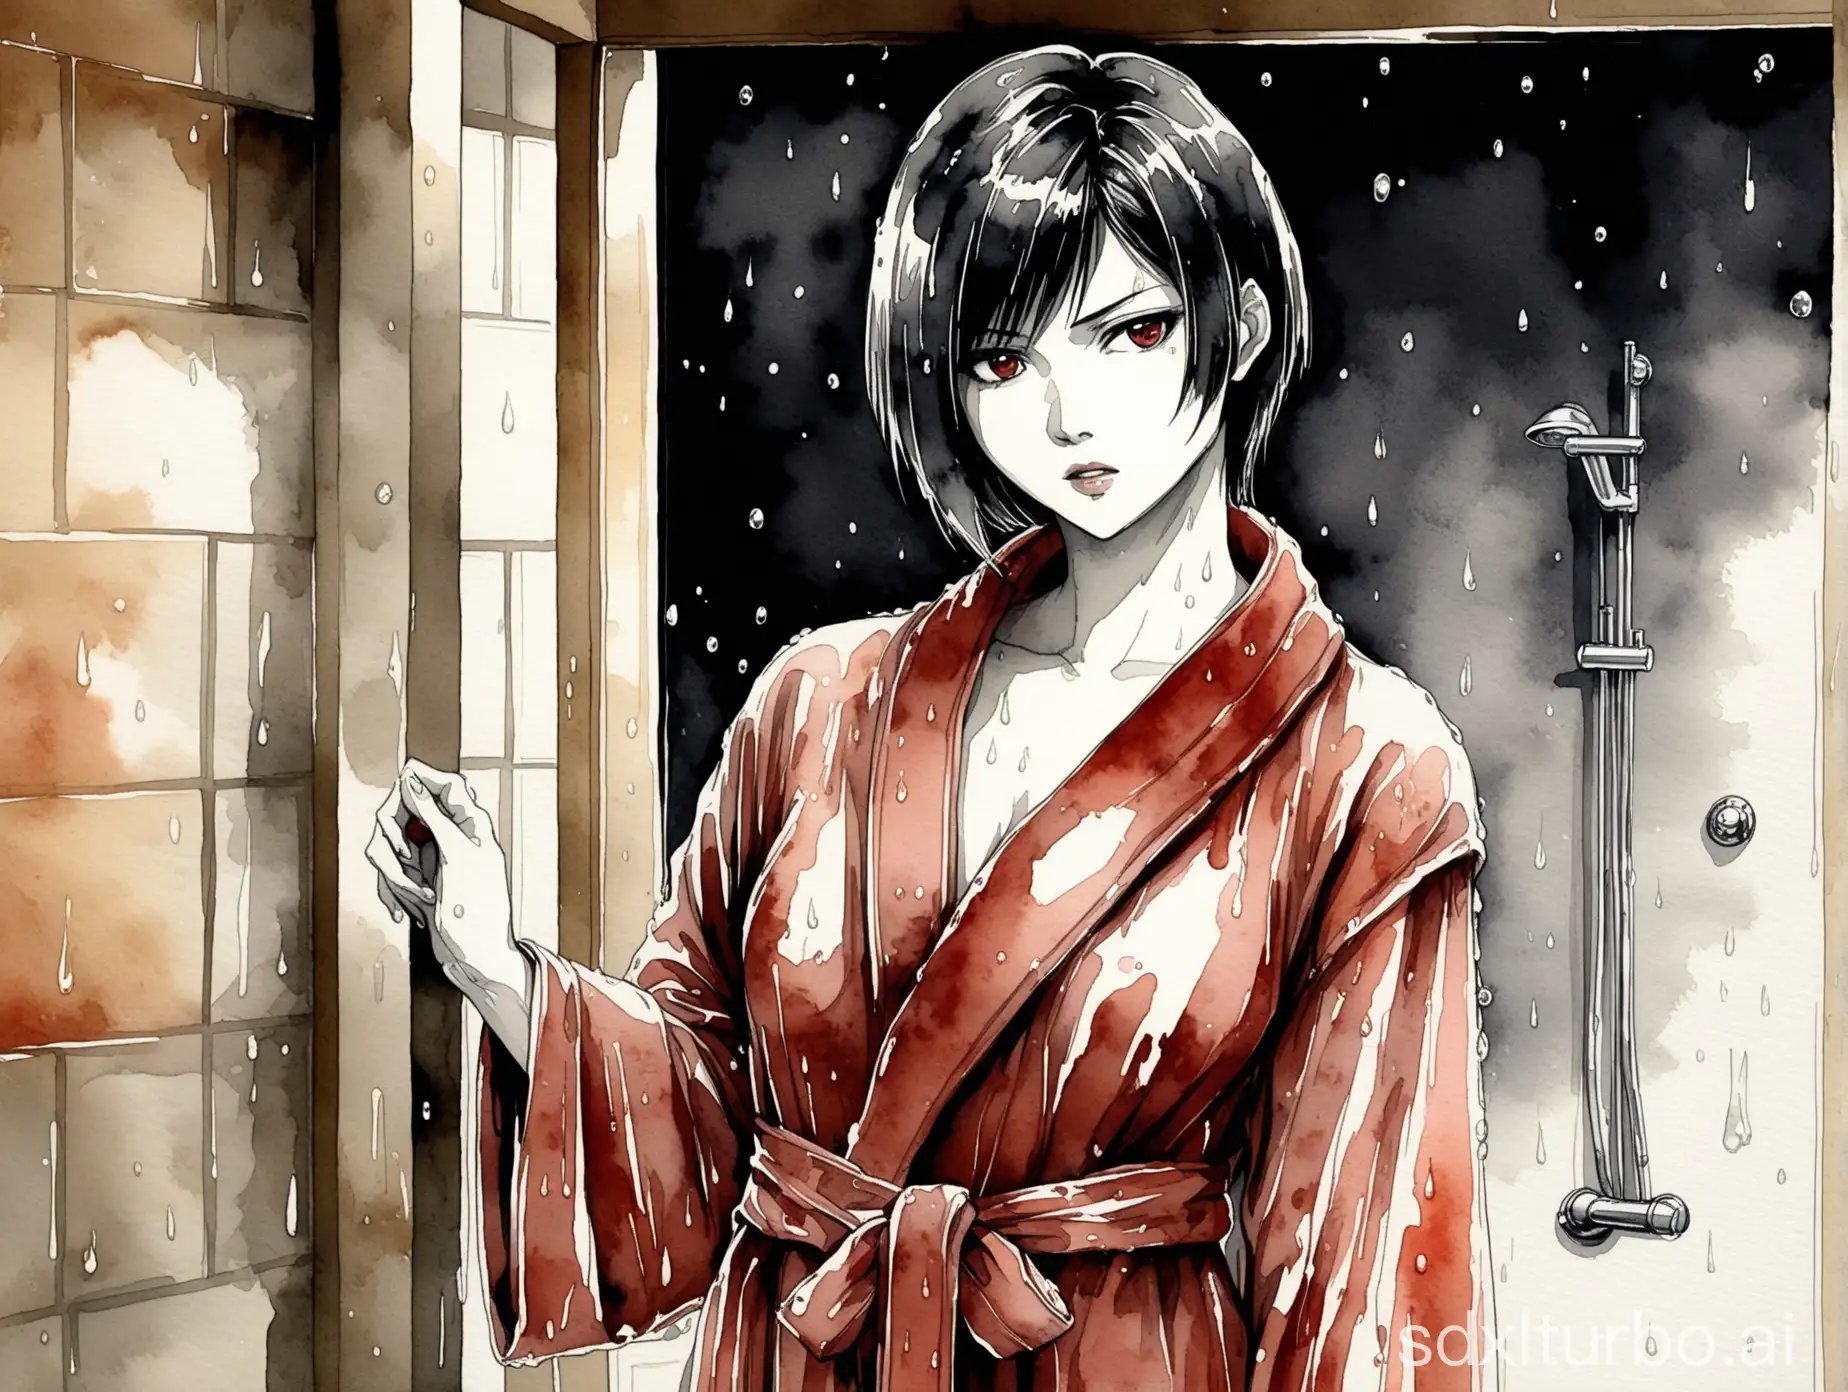 high quality, logo style, watercolor, in the form of Ada Wong, in a dressing gown after shower, brown bathrobe, wet hair, monochrome background, from the basement, stunning full color, 15th century,